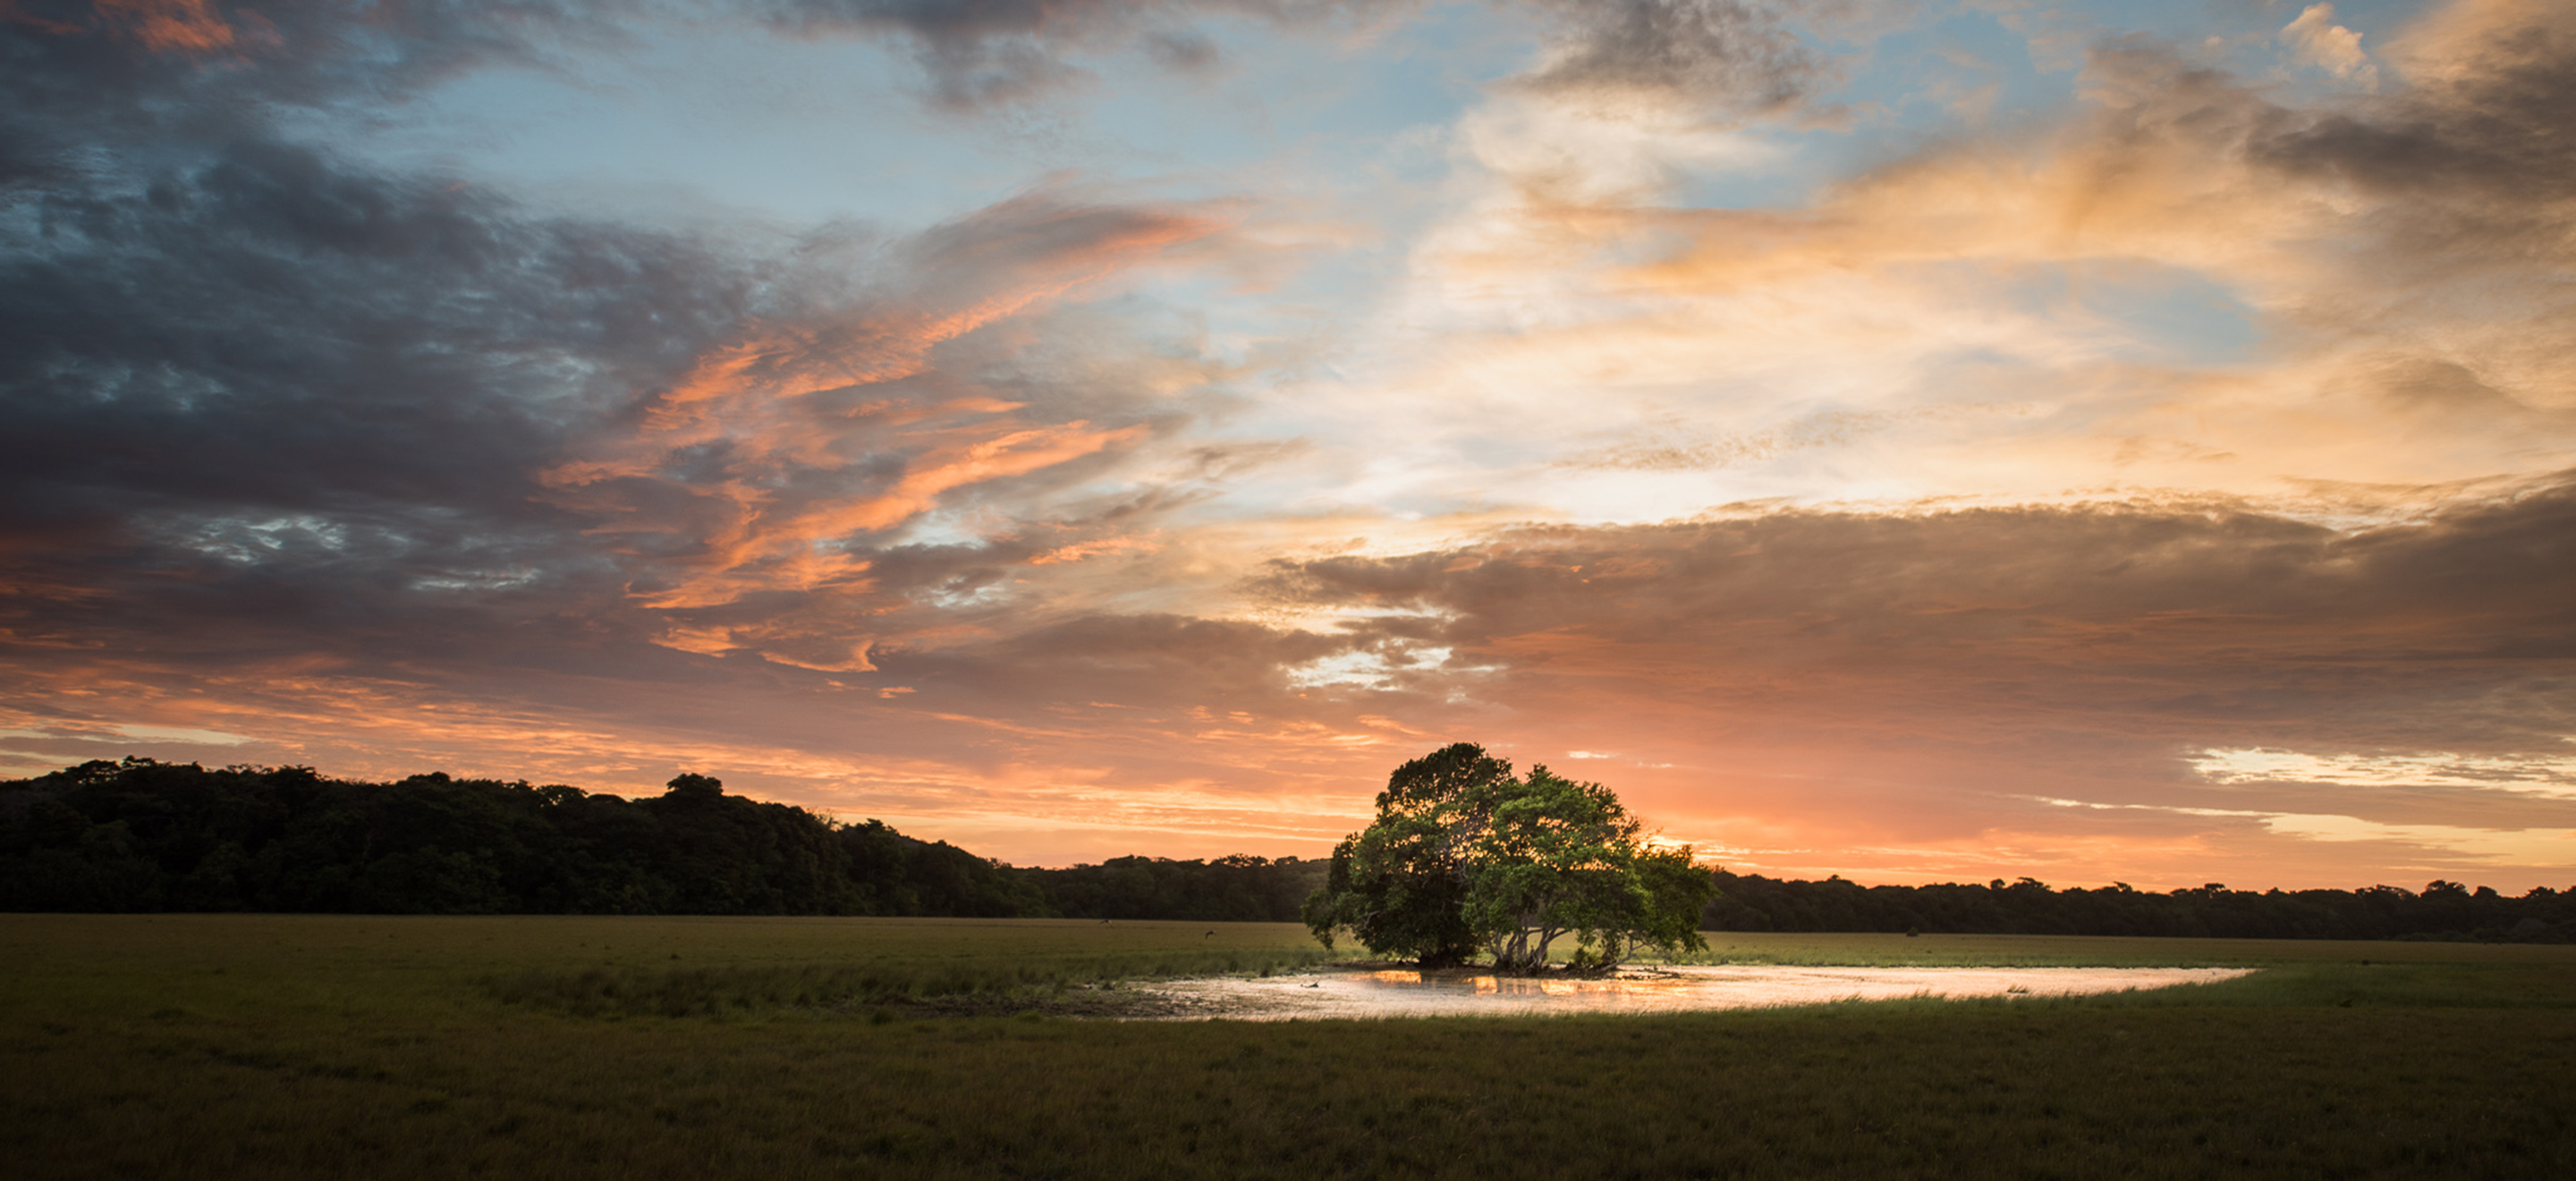 The sun sets over a lone tree in the center of a lagoon